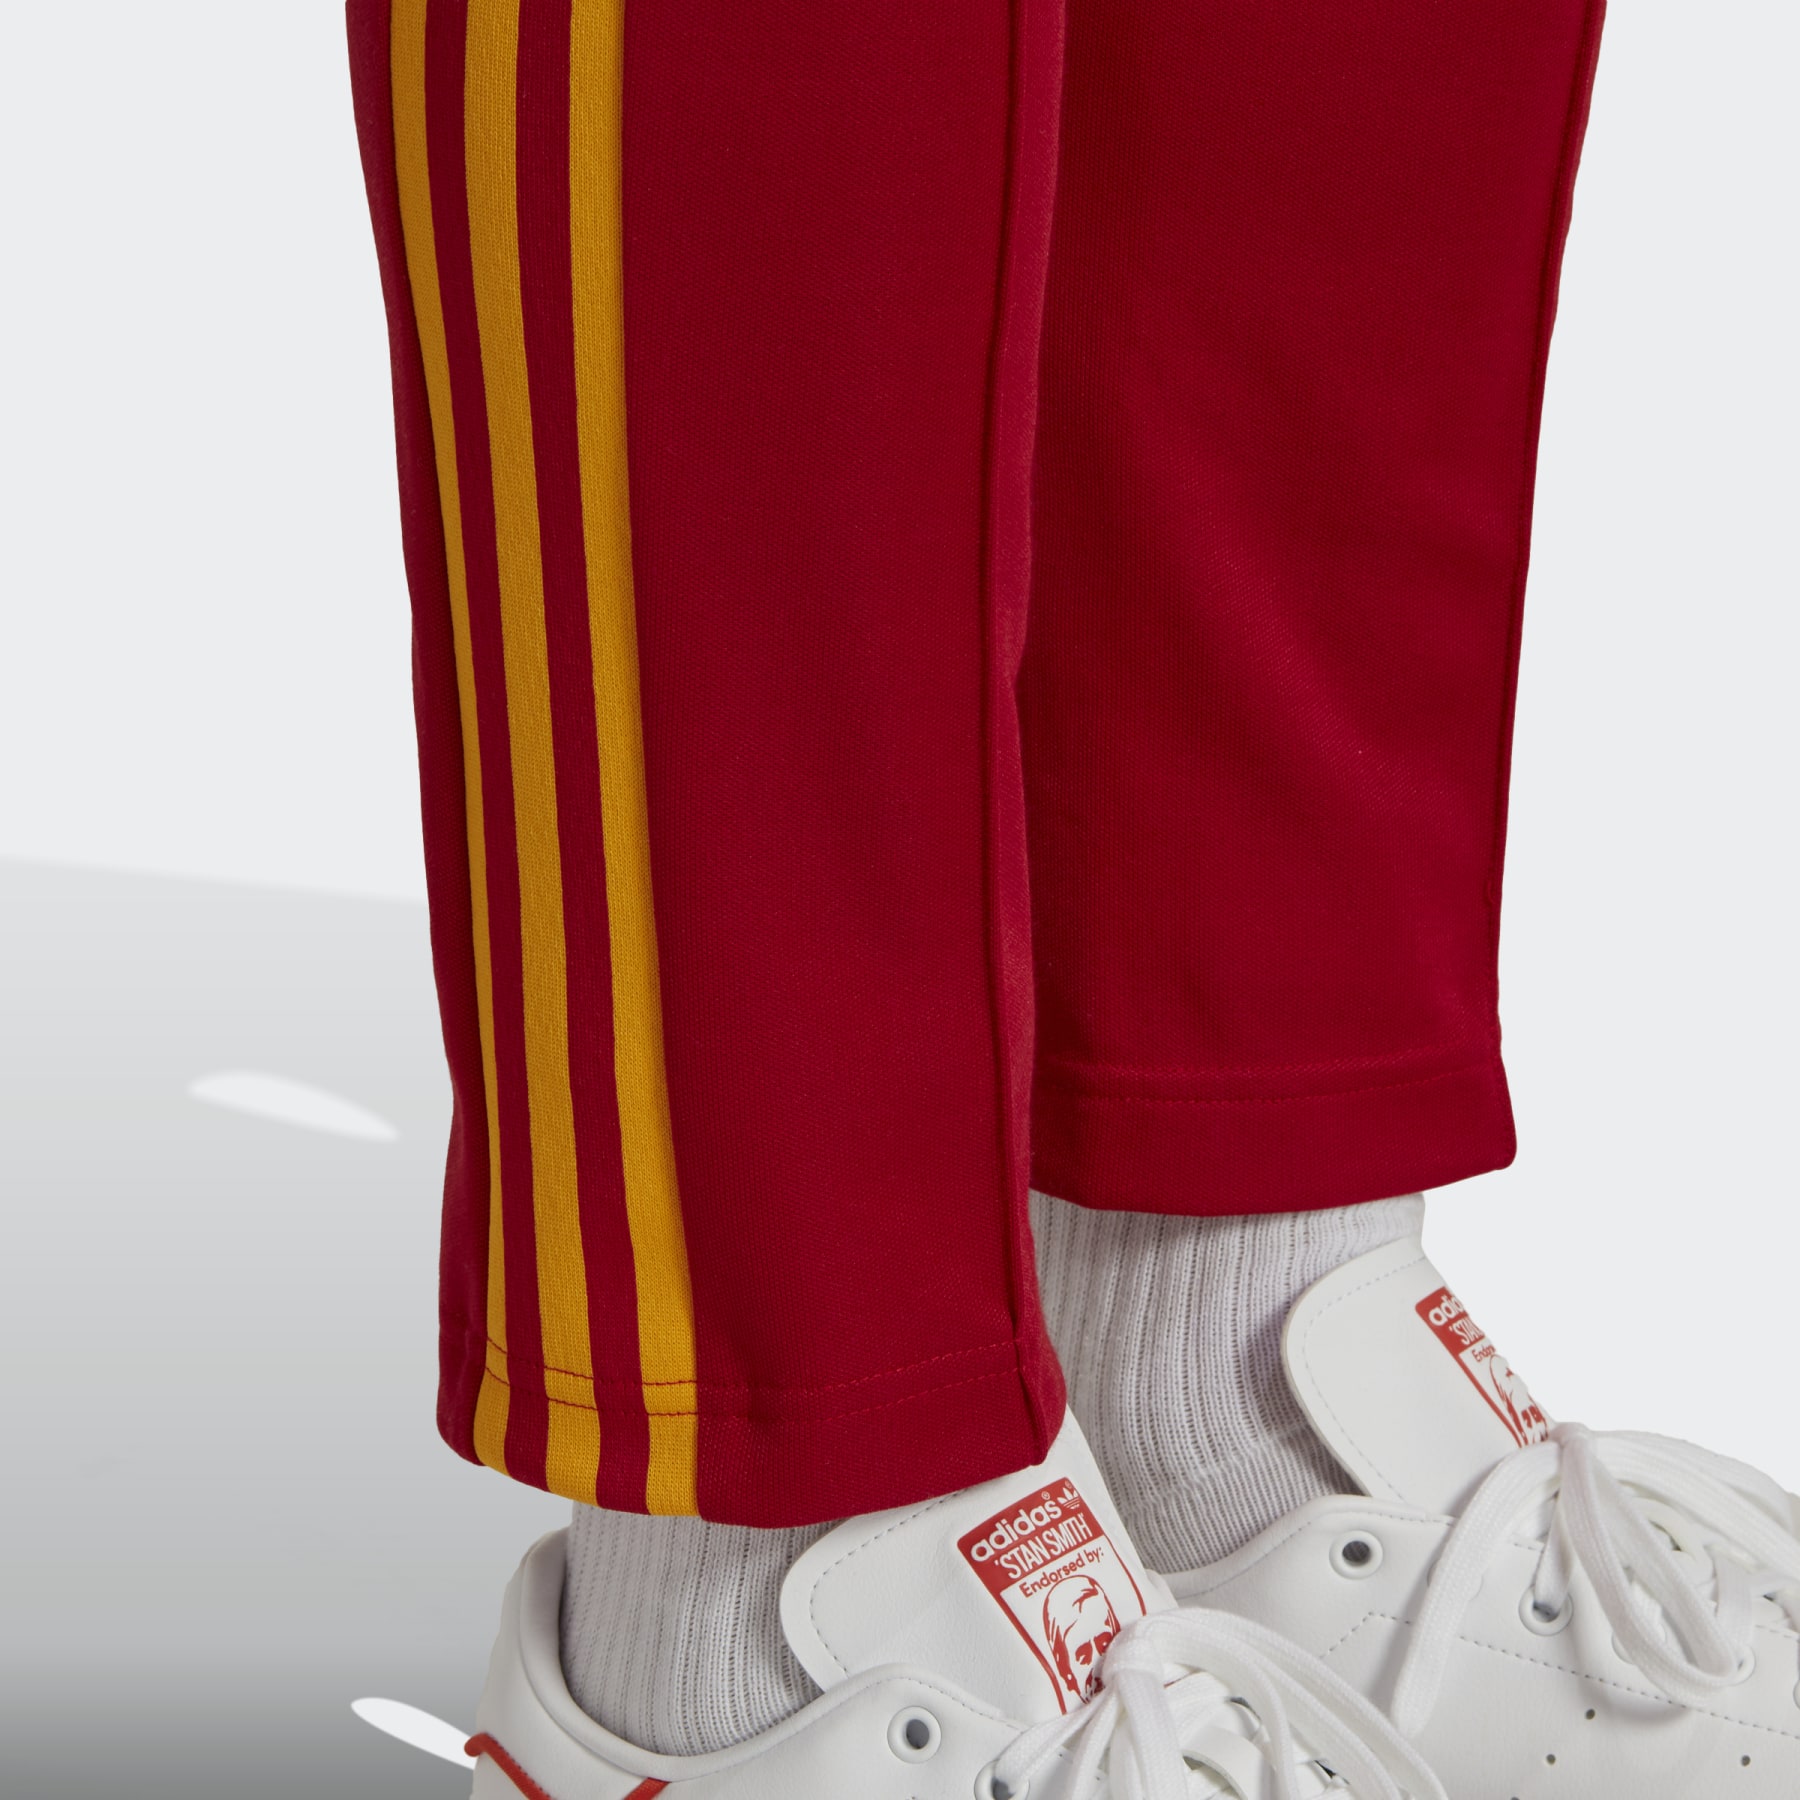 adidas Football Nations Track Pant Team Power Red / Team College Gold